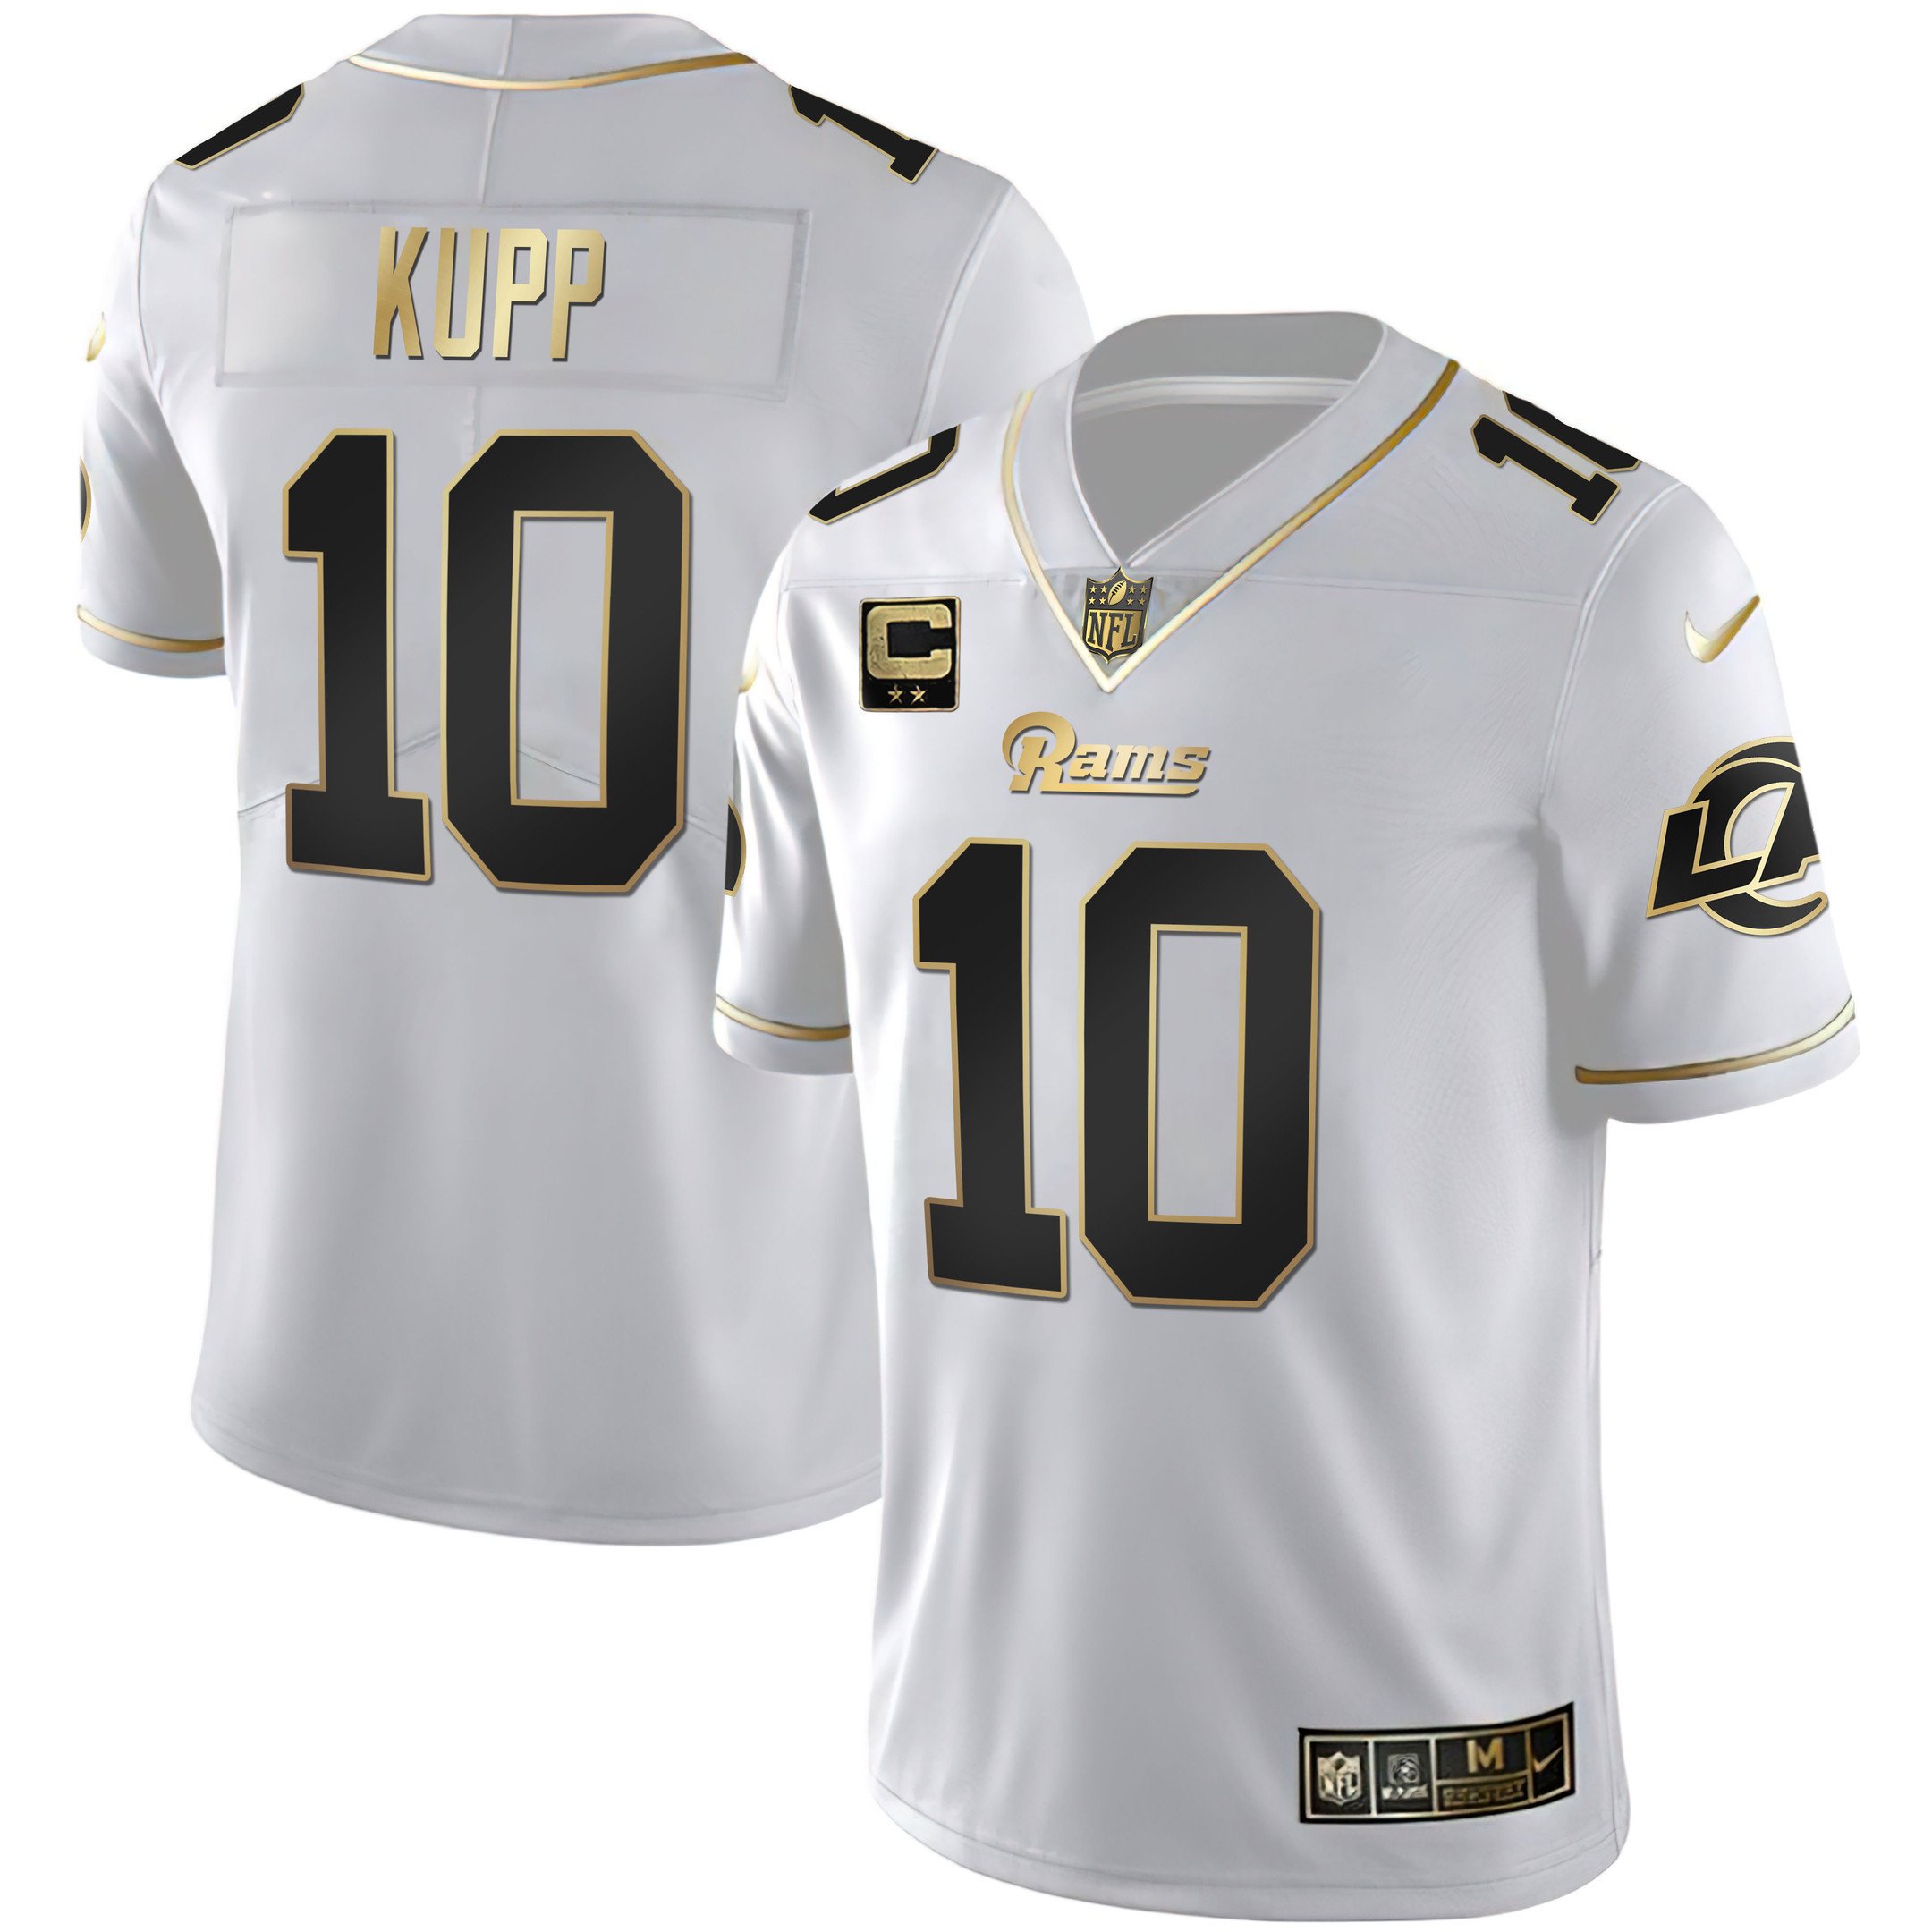 Men's Los Angeles Rams White Gold & Black Gold Jersey - All Stitched - Vgear